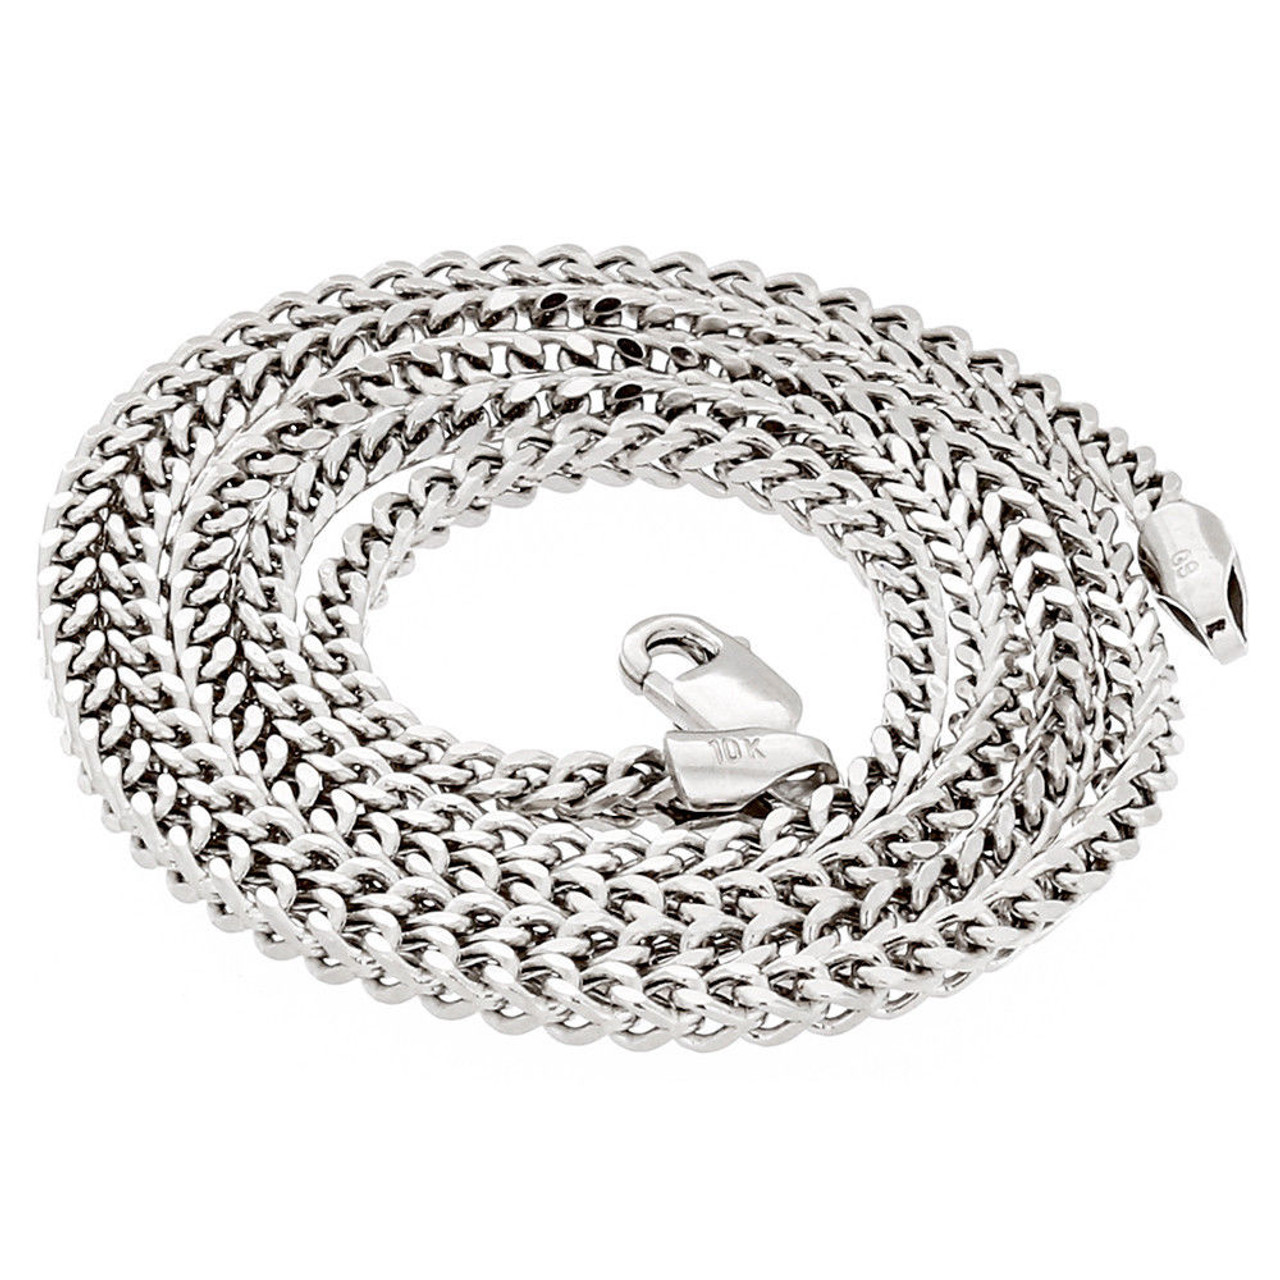 10k Real White Gold 2.0 MM Franco Box Cuban Chain Necklace 18 Inch